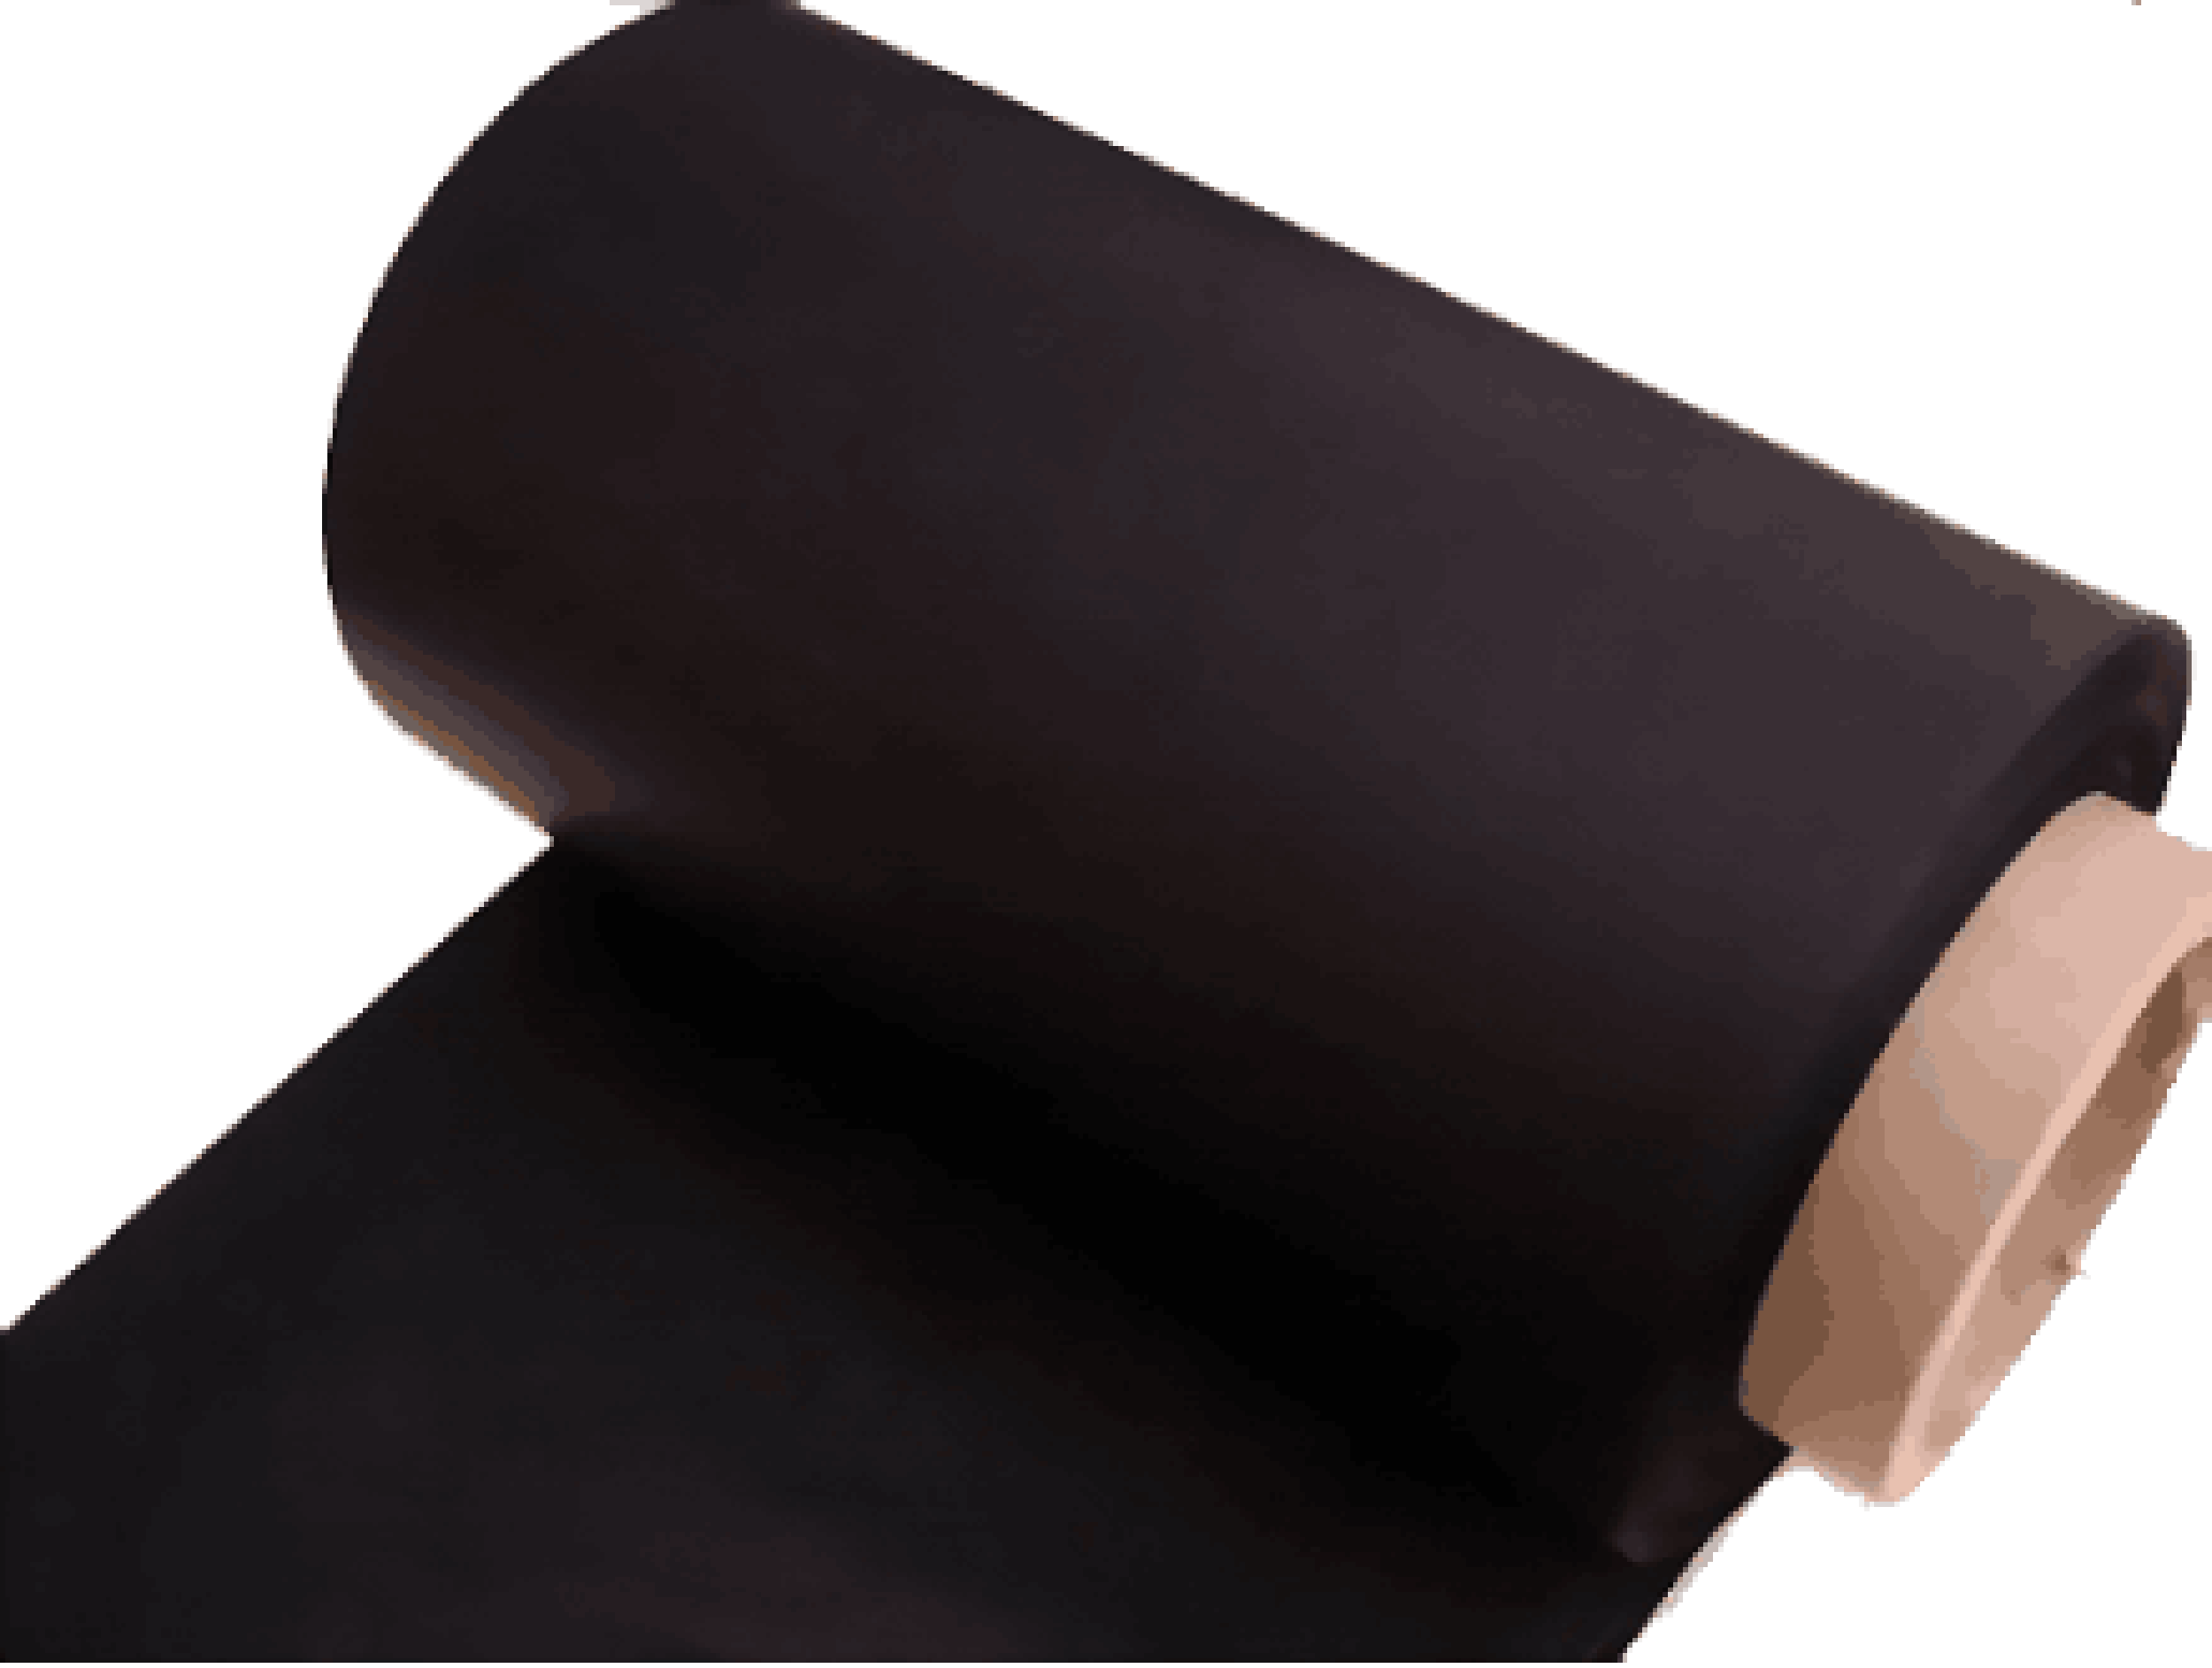 Double-sided Pu Black carbon conductive film For Ekg